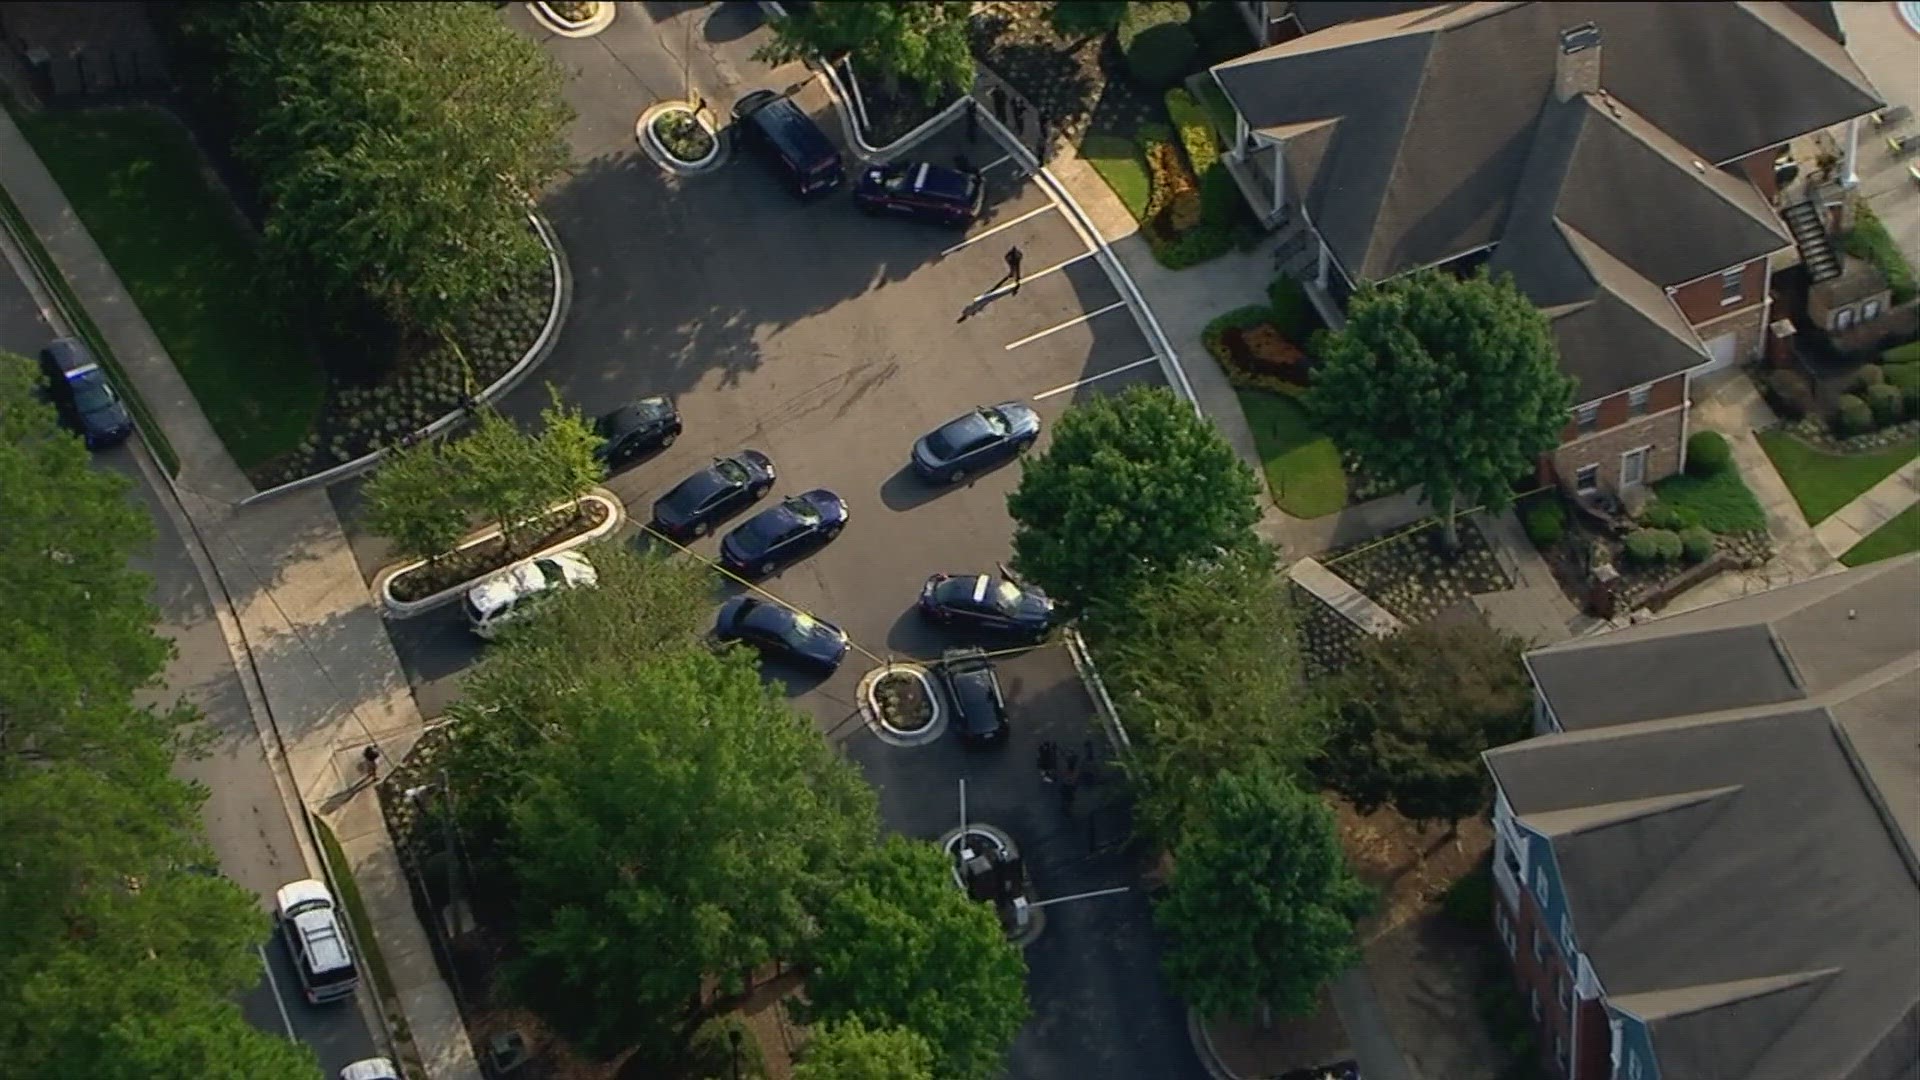 Atlanta Police said they found the man dead at 751 Fairburn Rd. SW, which is the location of the Villas at Princeton Lakes apartment complex.